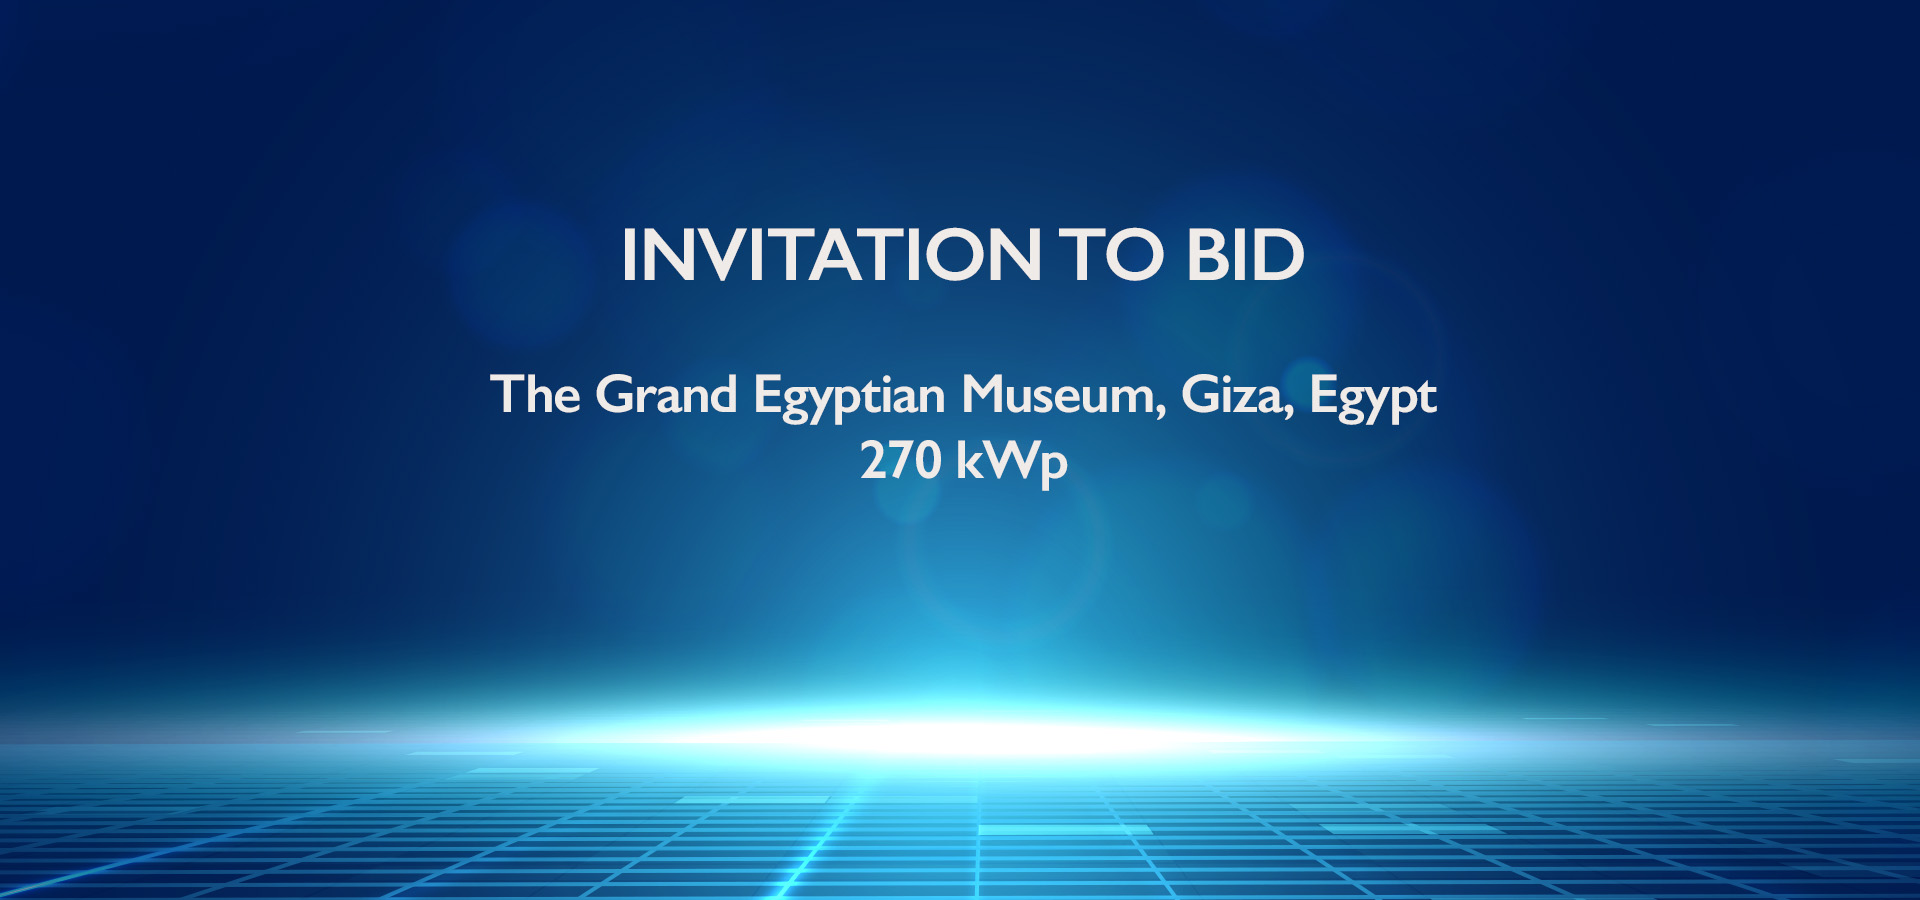 The Grand Egyptian Museum Project